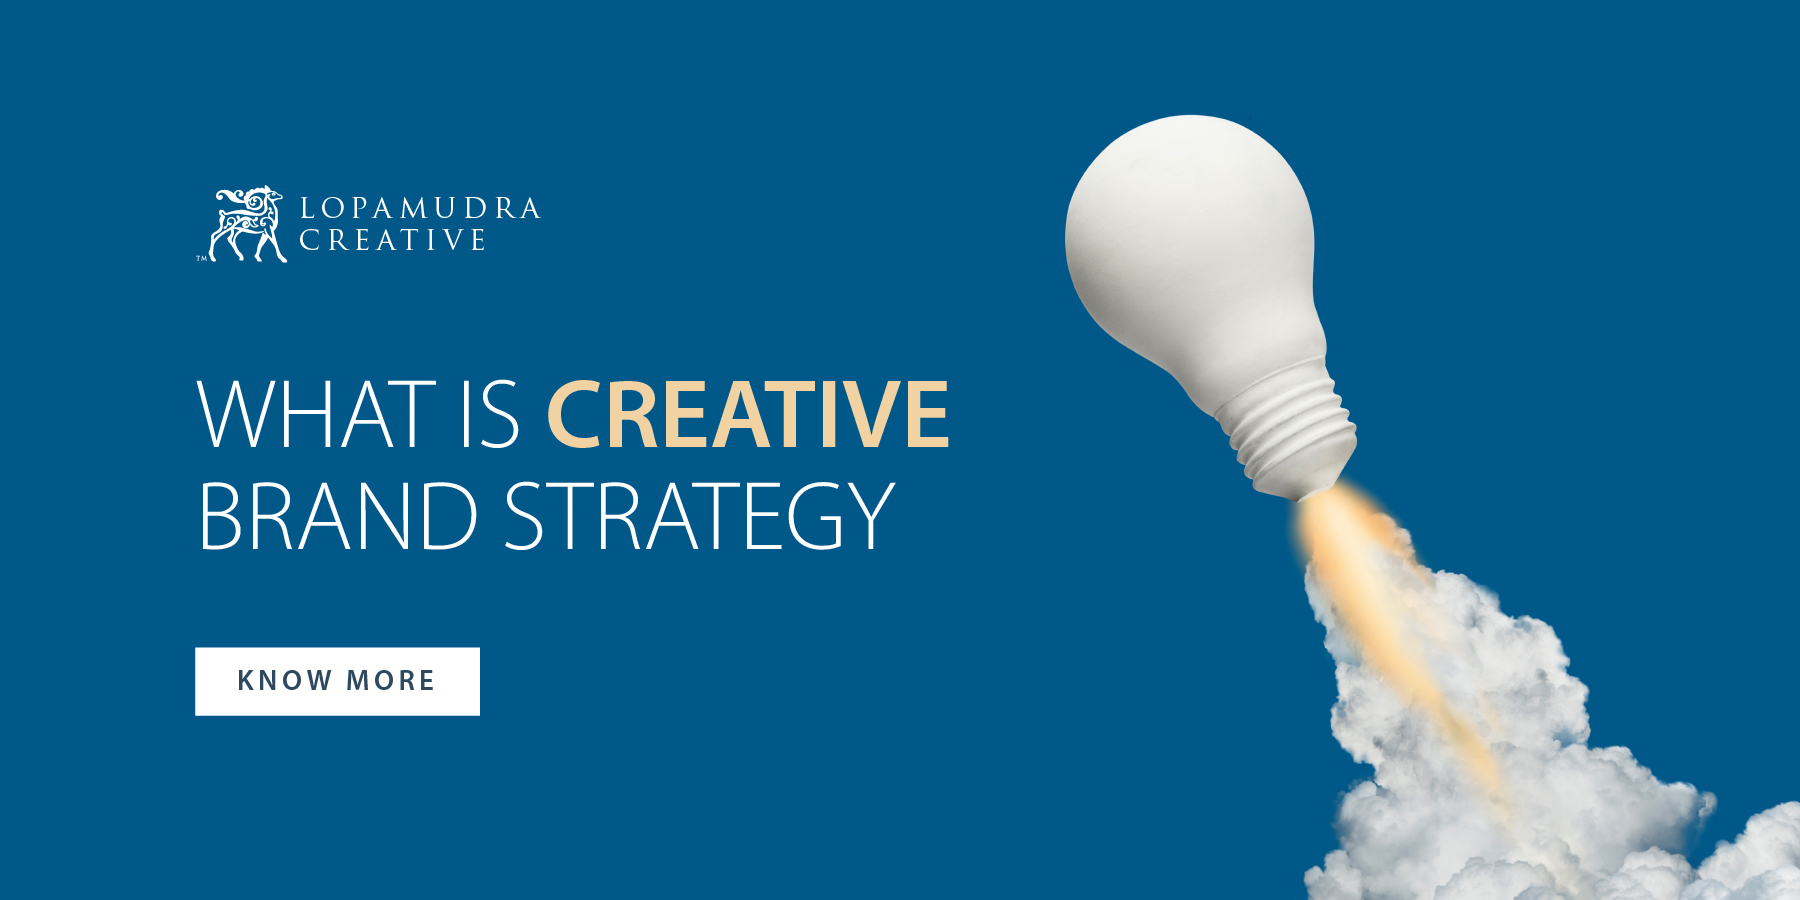 What is creative brand strategy